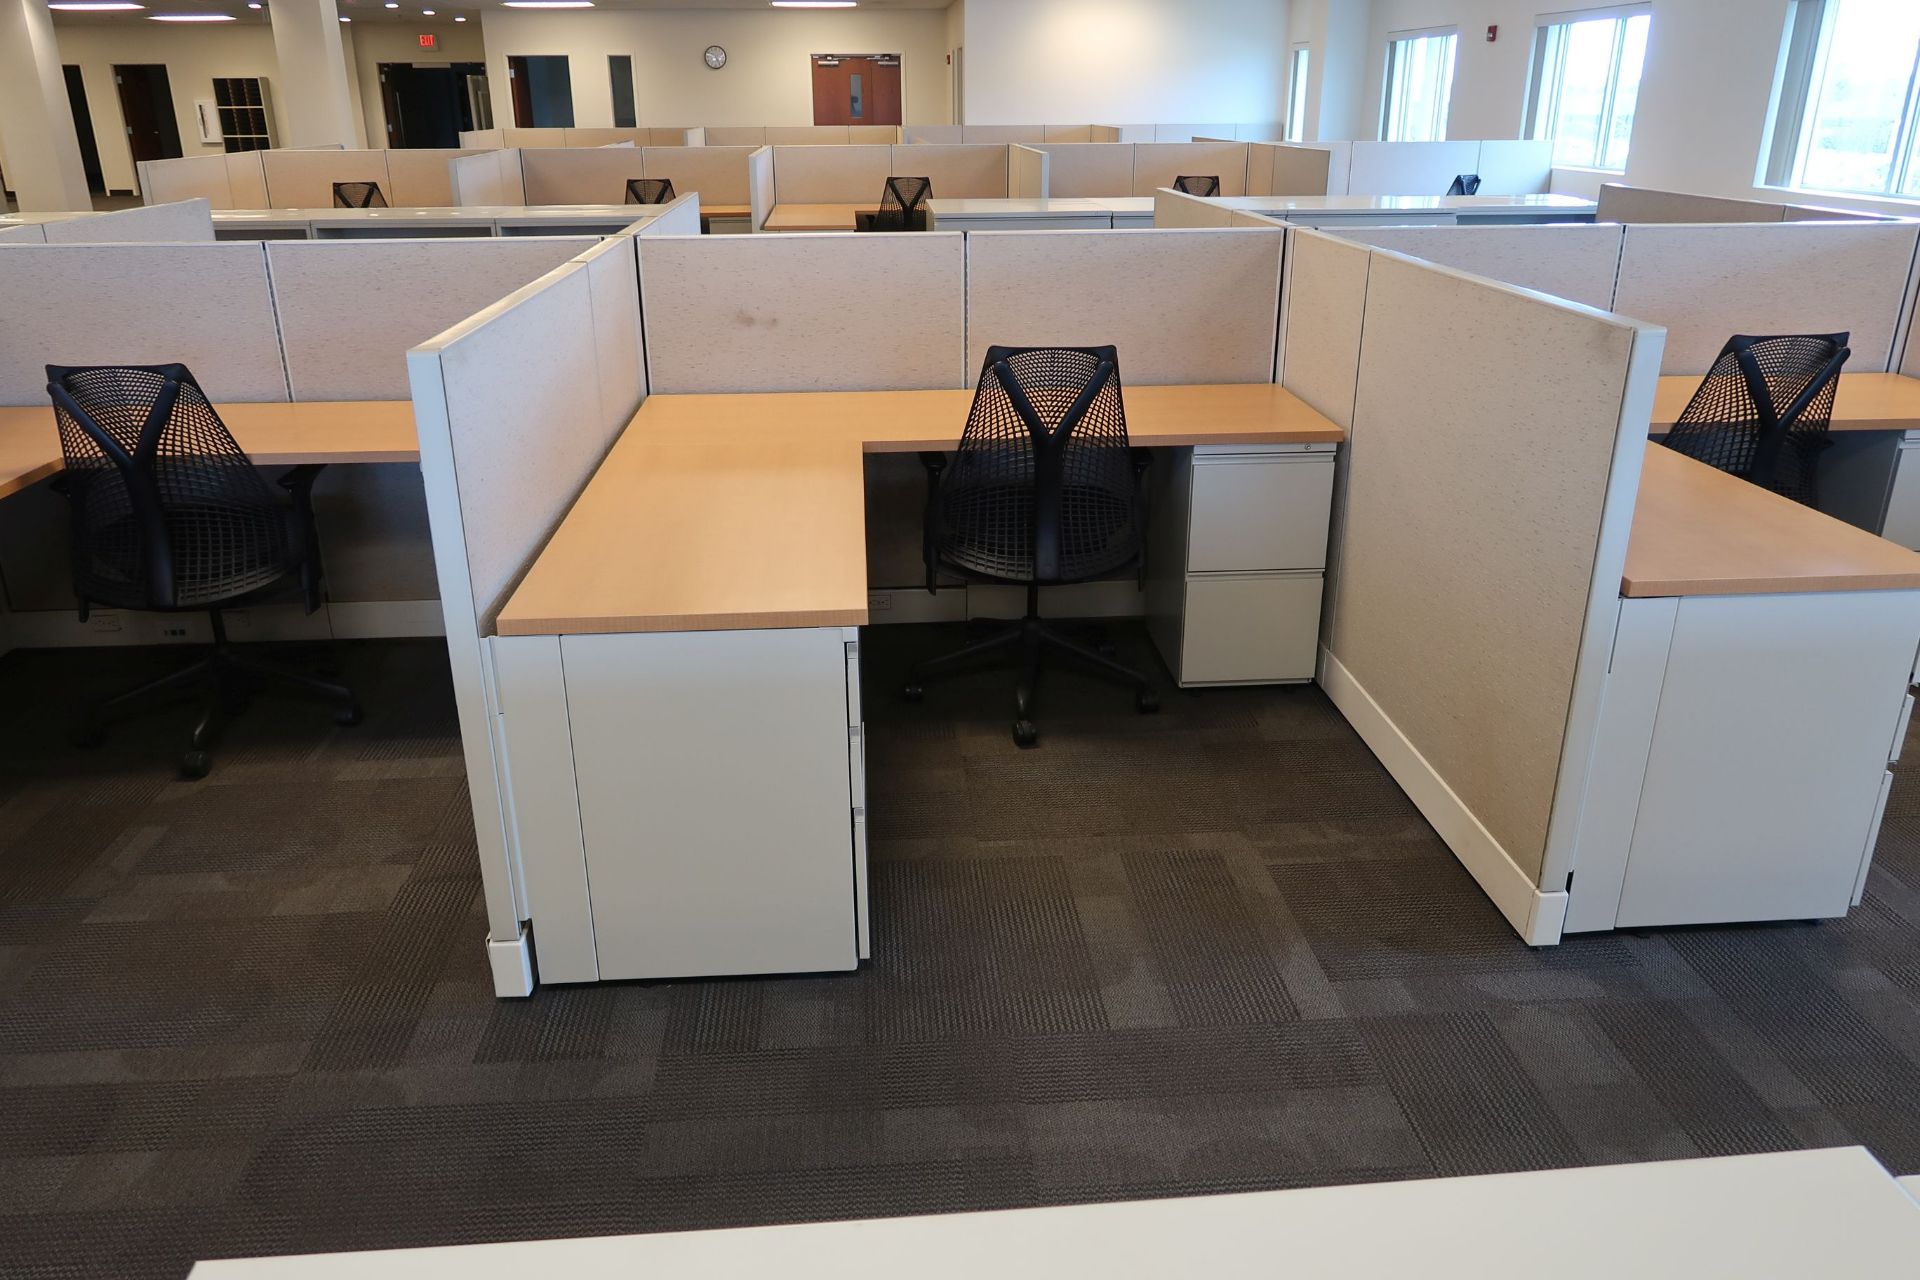 (LOT) 10-PERSON HERMAN MILLER CUBICLE SET 47" HIGH WALLS WITH CHAIRS - Image 9 of 11